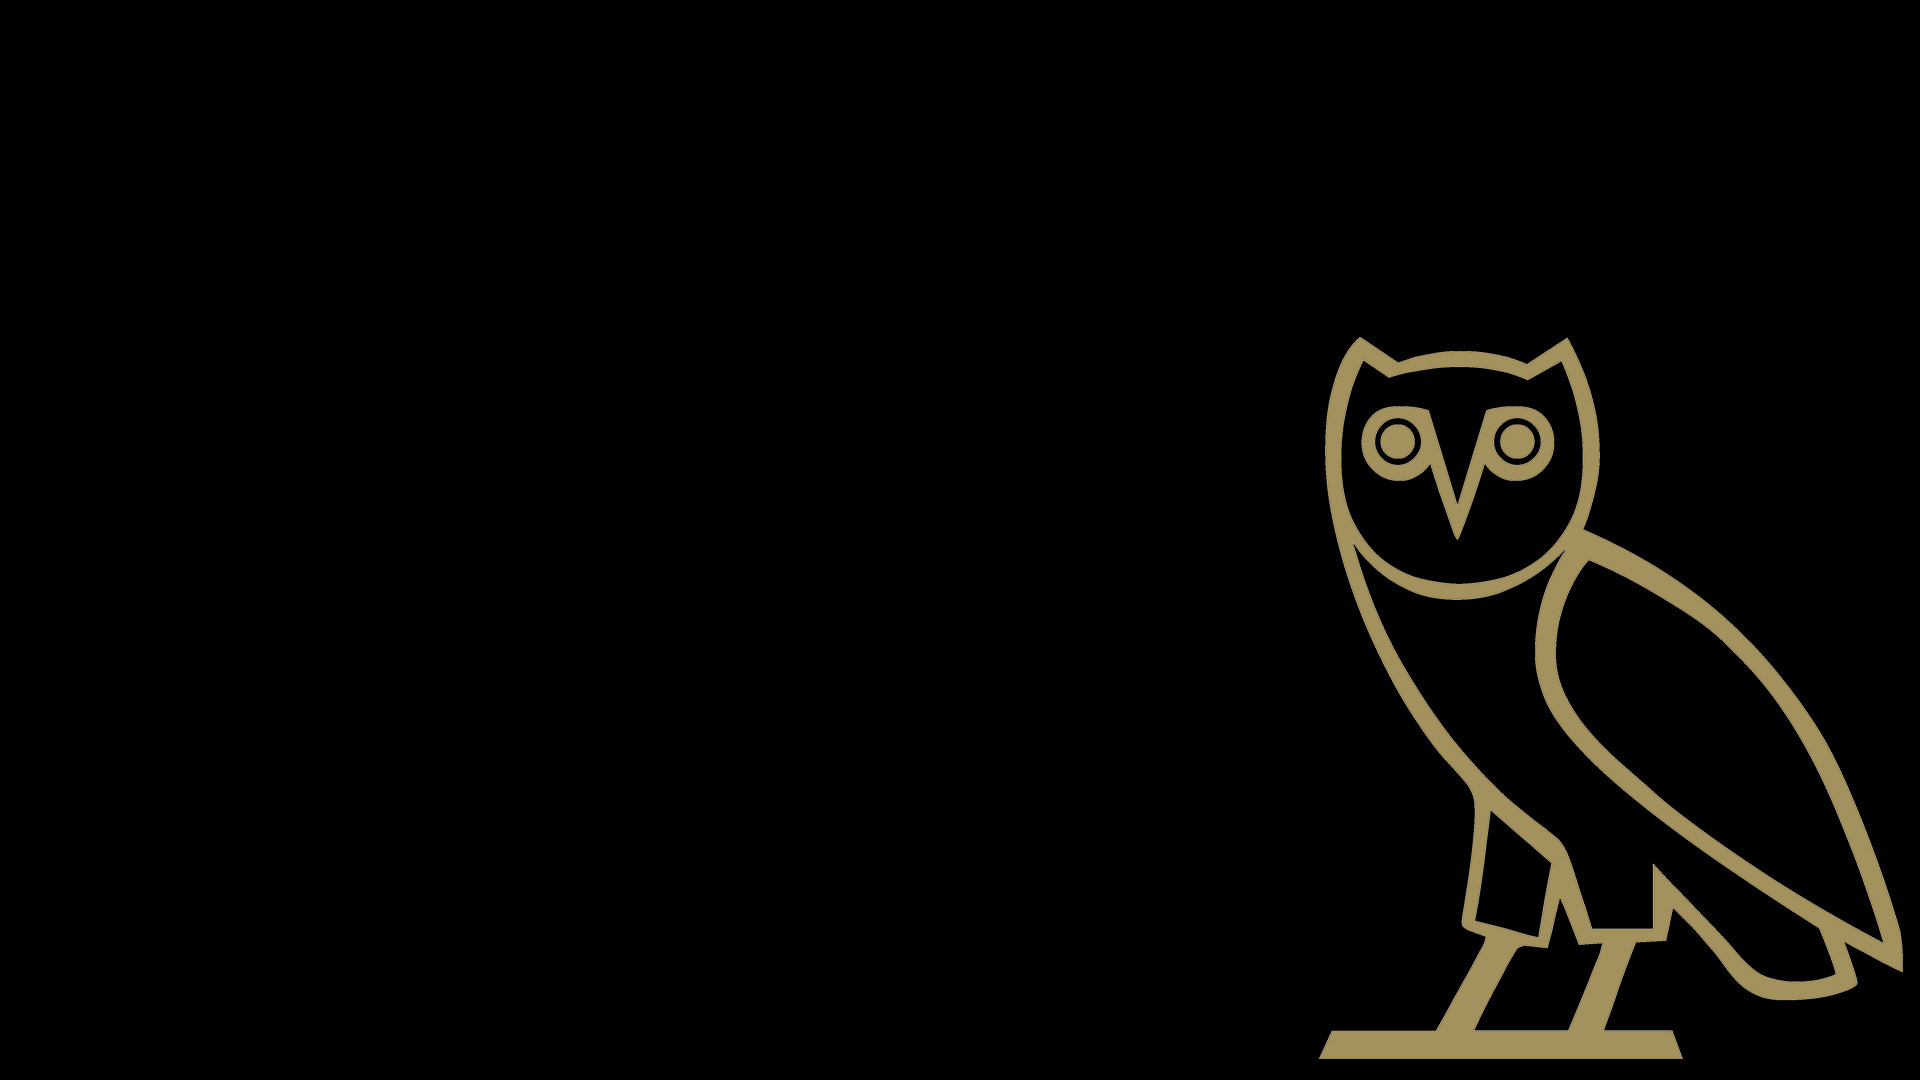 Ovo Owl Wallpaper (78+ images)